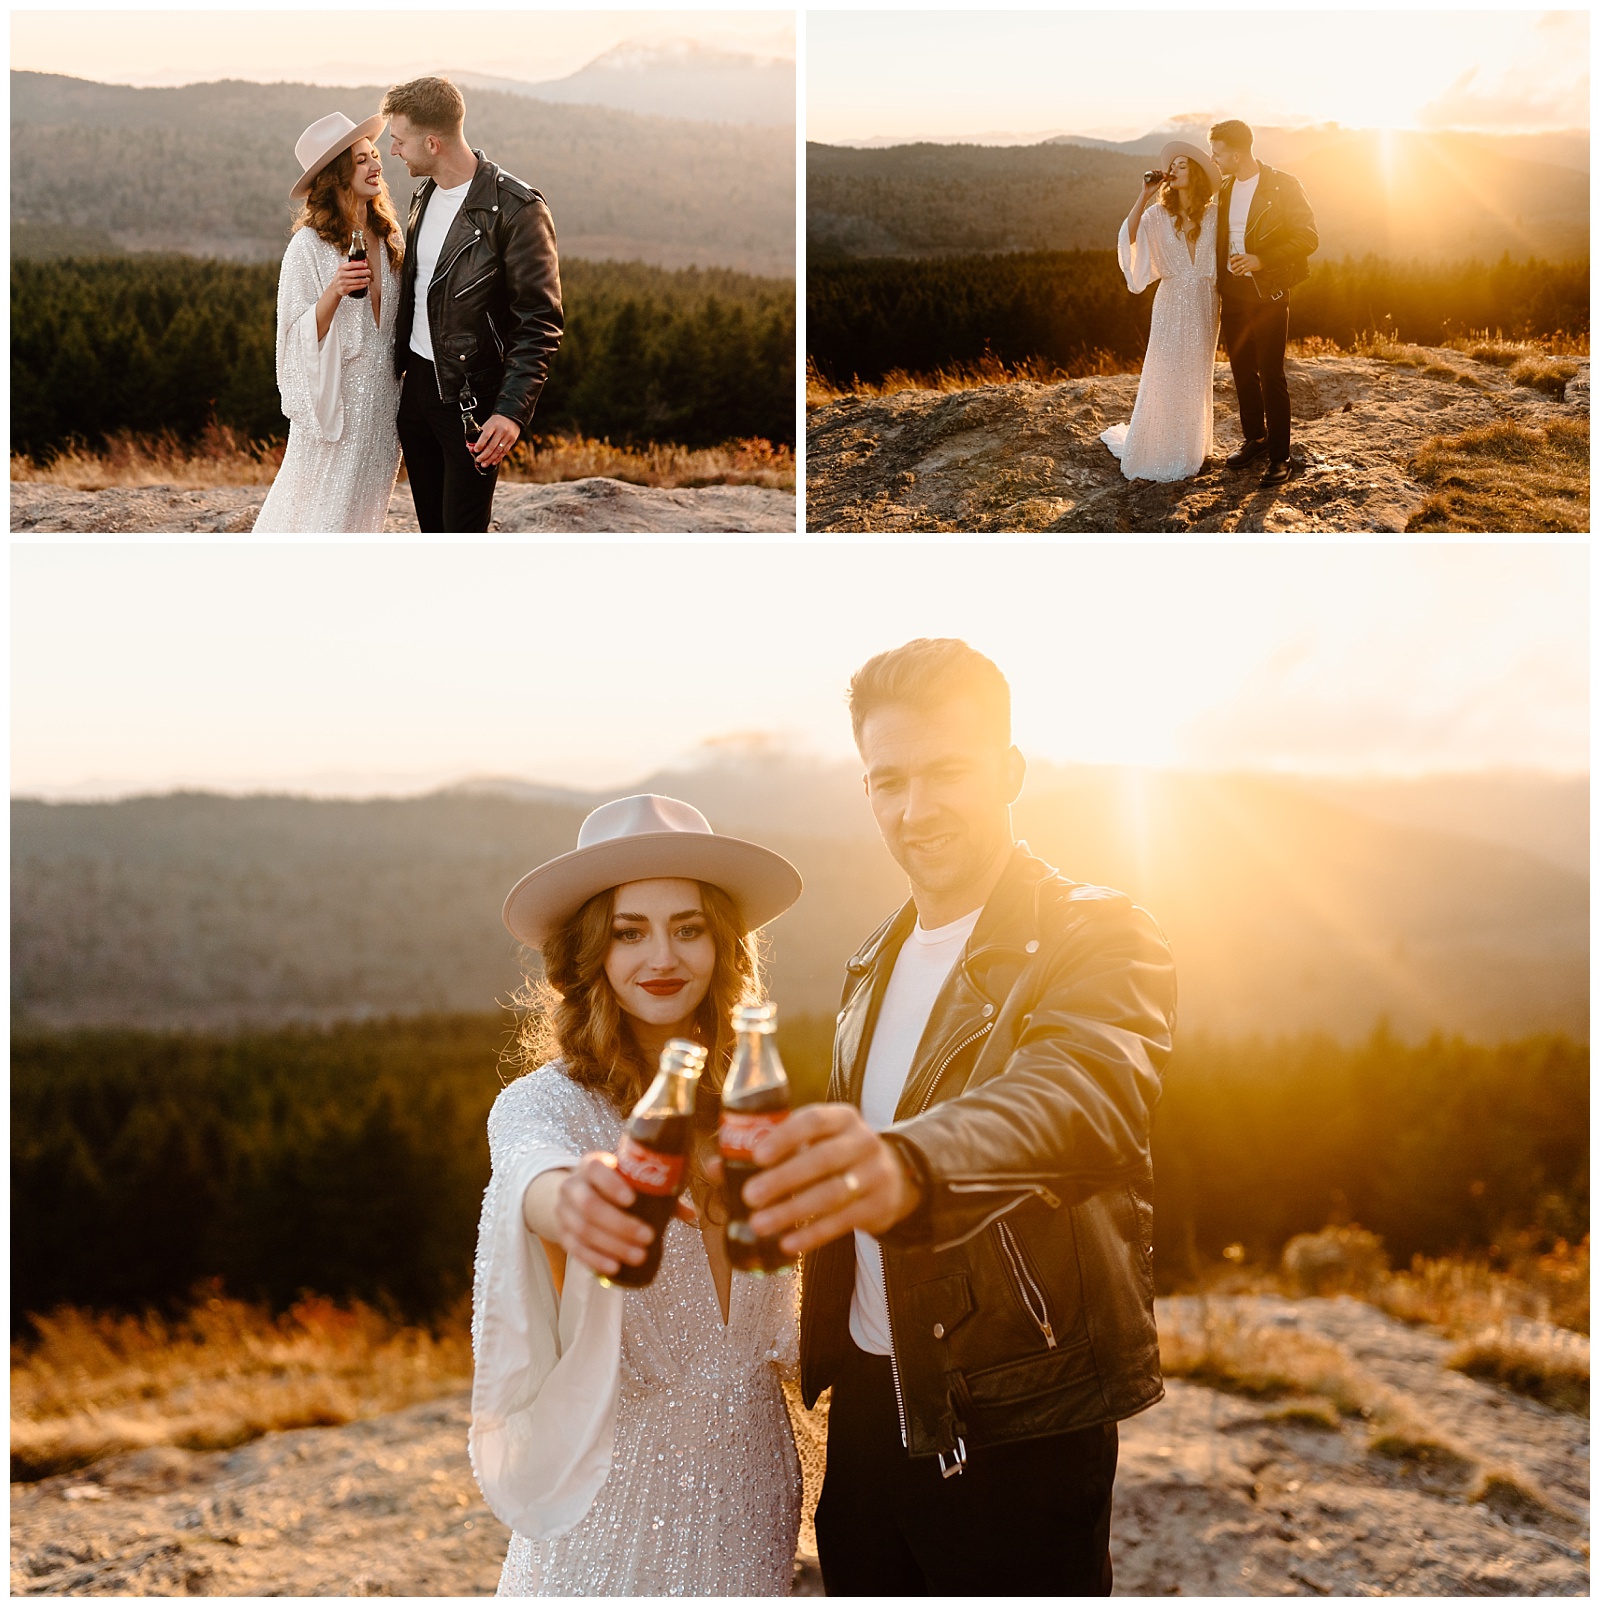 new bride and groom hold up classic coke glass bottles at sunset on mountain top elopement photoshoot